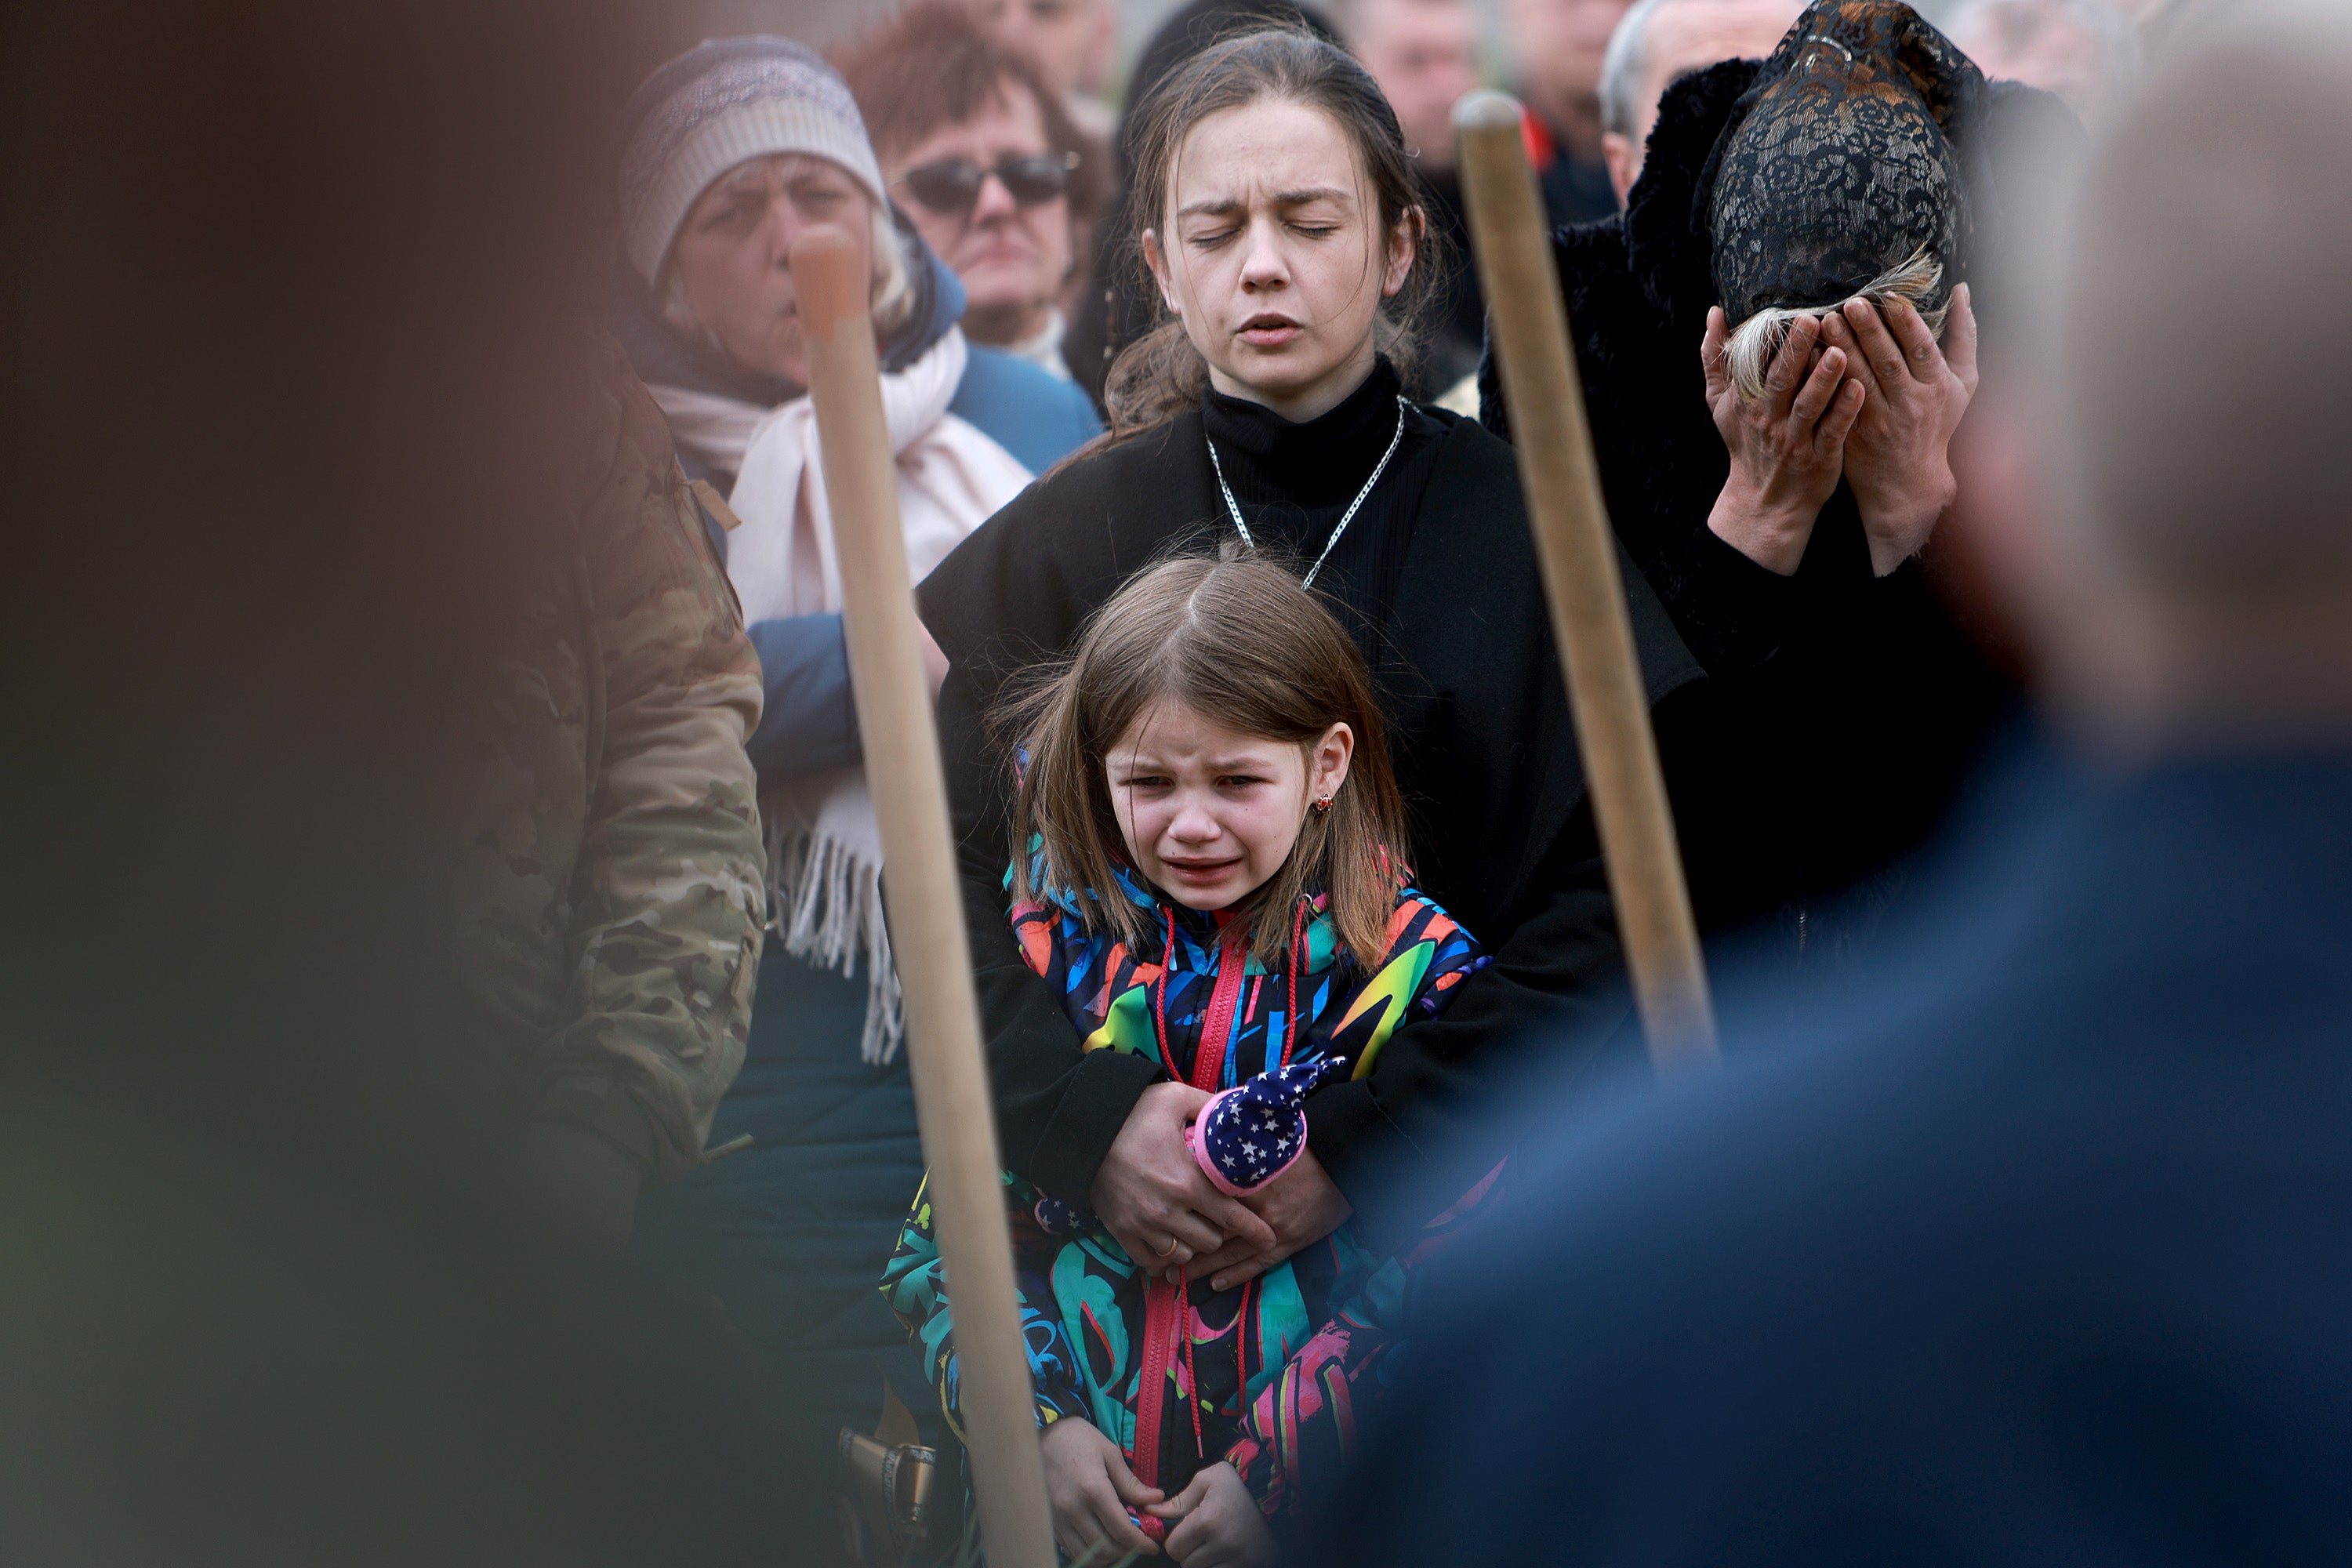 Christina Dragun hugs her daughter Olya Siksoy during the burial of her husband Ukrainian soldier Ruslan Siksoy at the Lychakiv Cemetery in Lviv, Ukraine. Siksoy was killed while fighting against the Russian military in the Donbas area